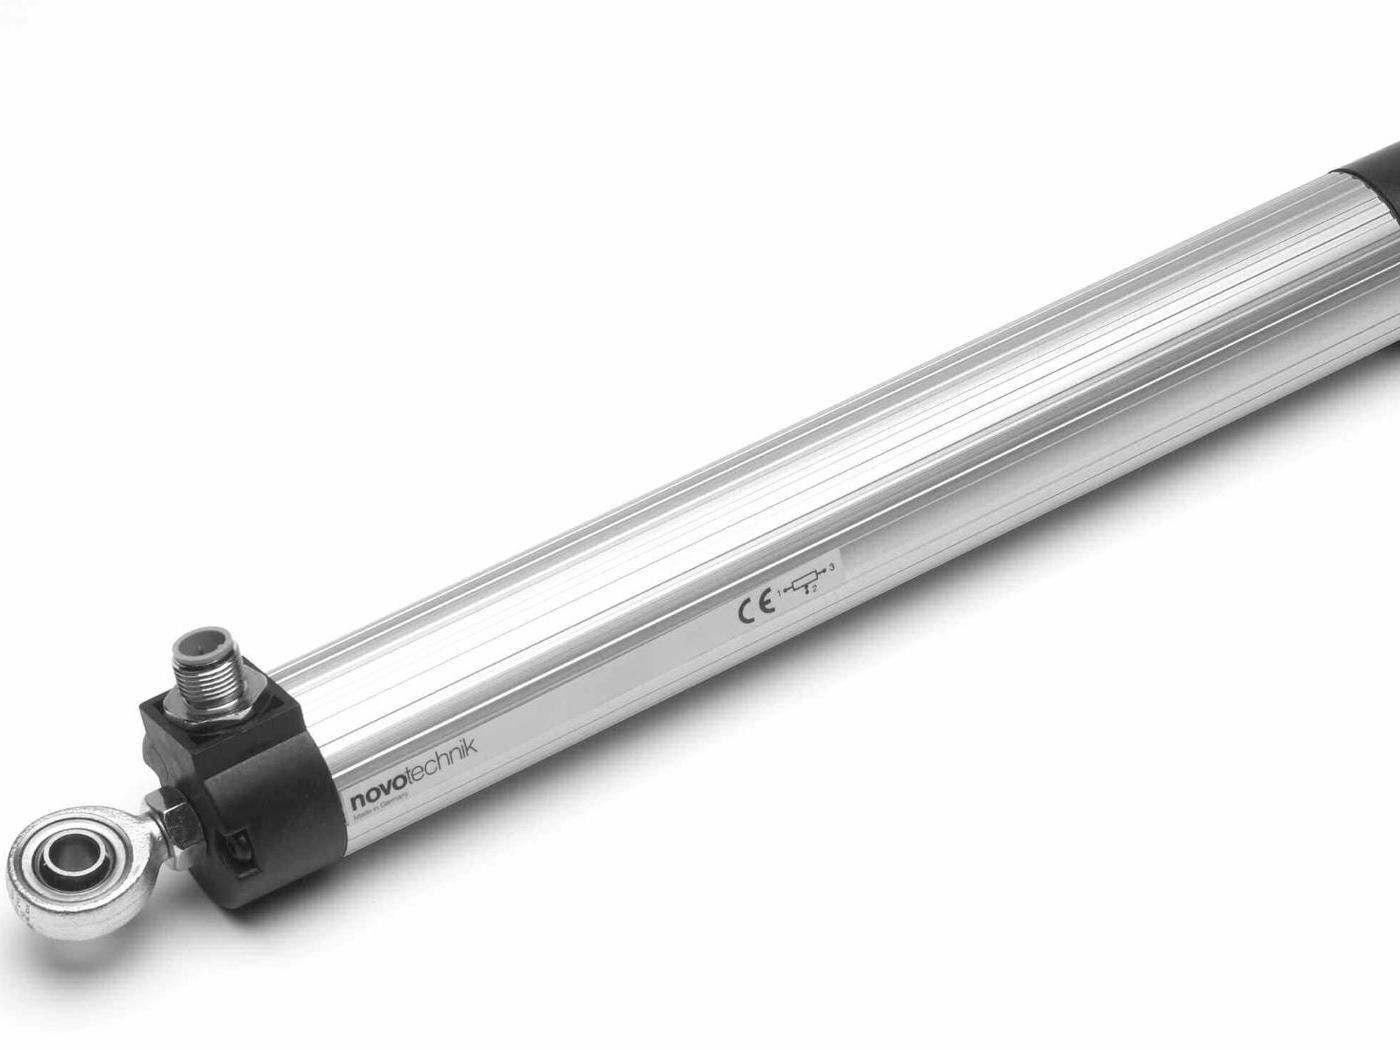 Six new linear position sensors now available